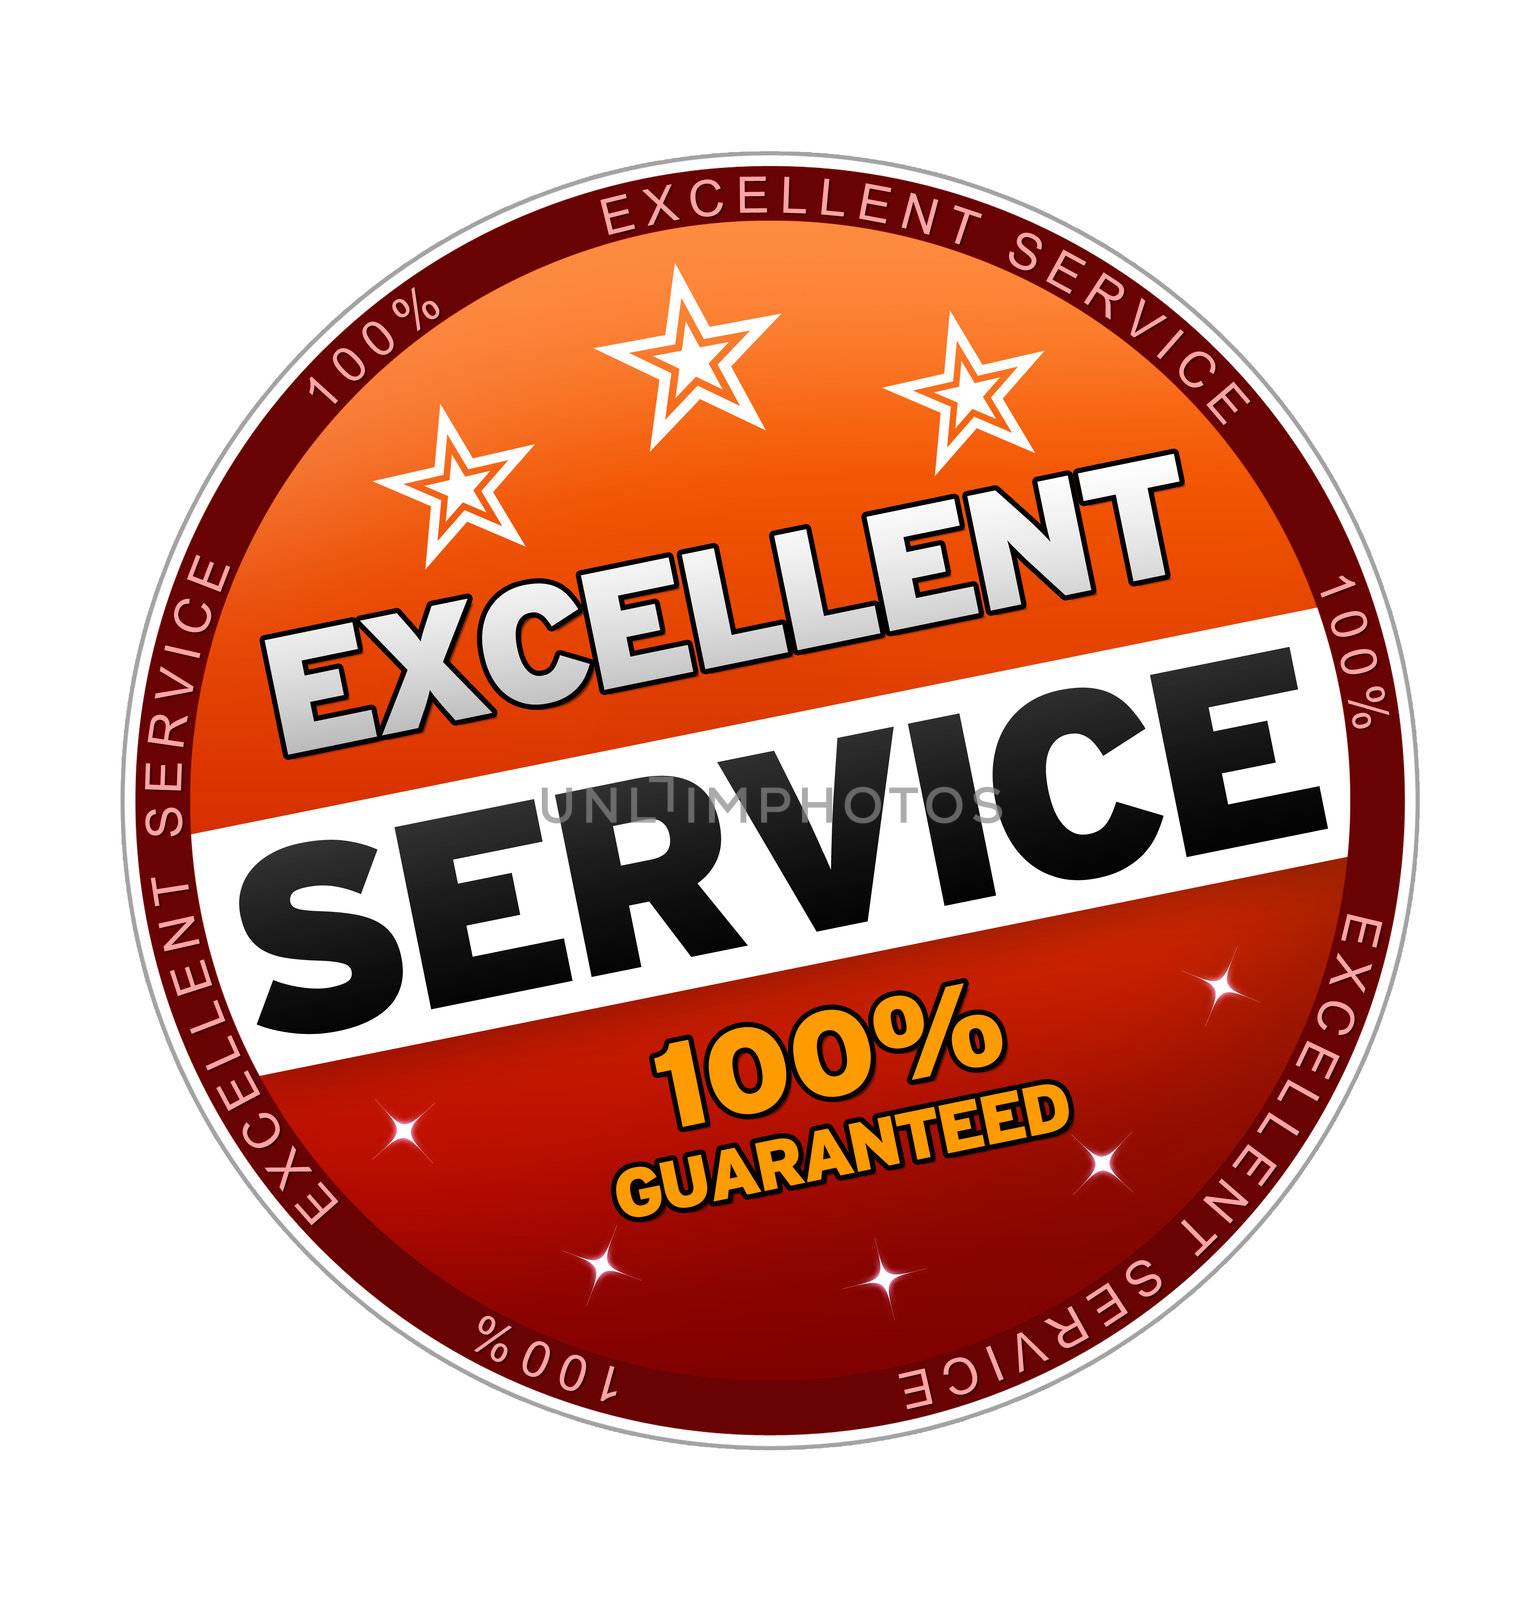 100% Excellent Service Button on white background.